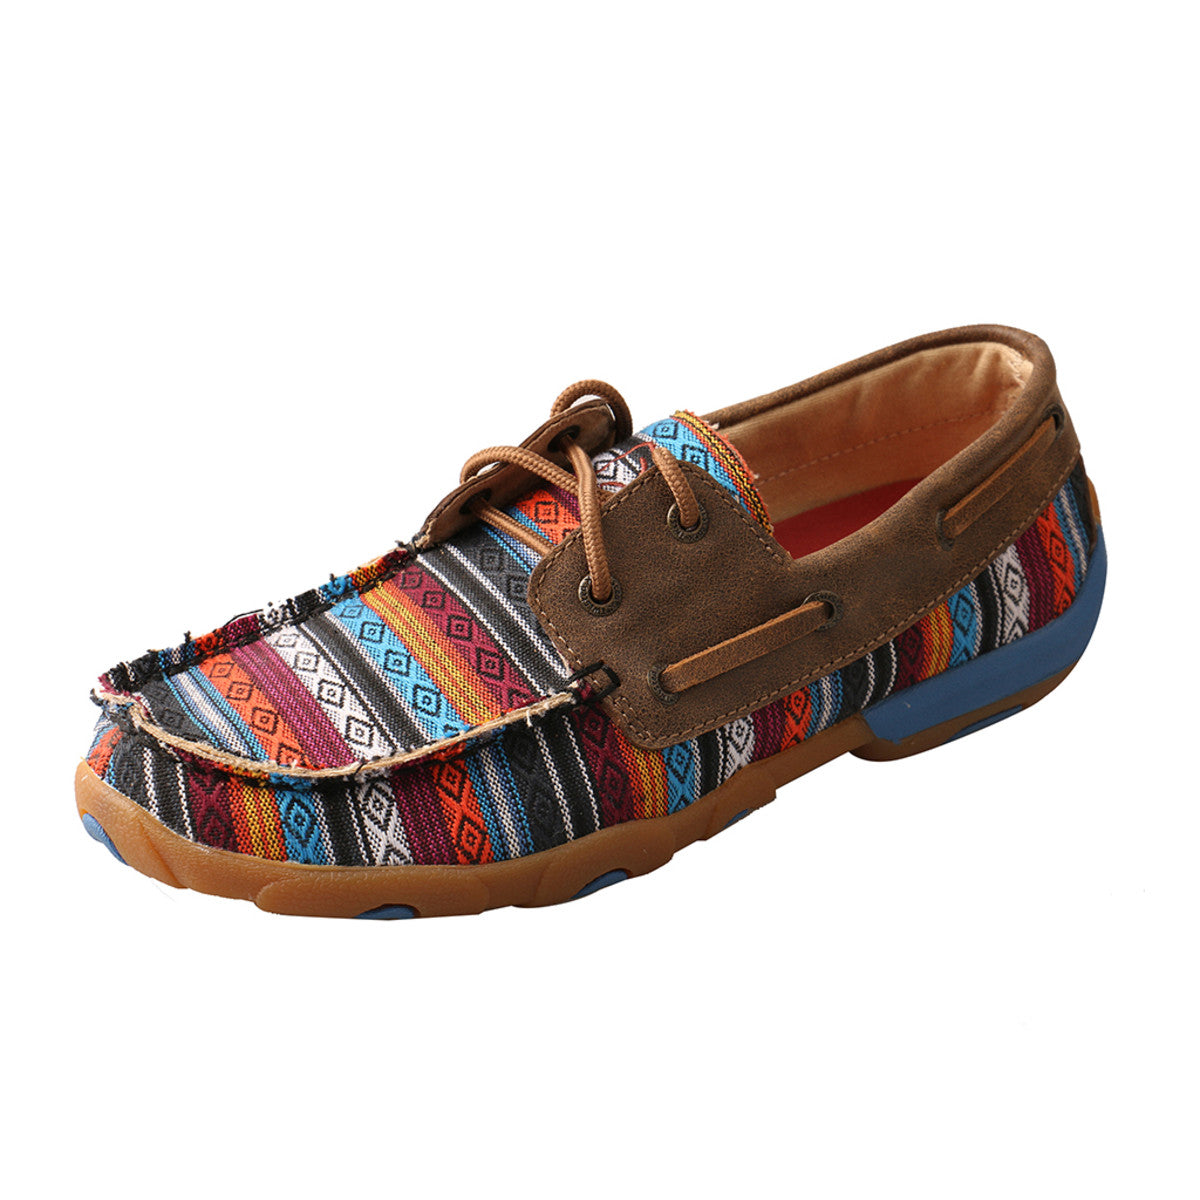 Women's Twisted X Boat Shoe Driving Moccasins in Serape & Bomber from the side view